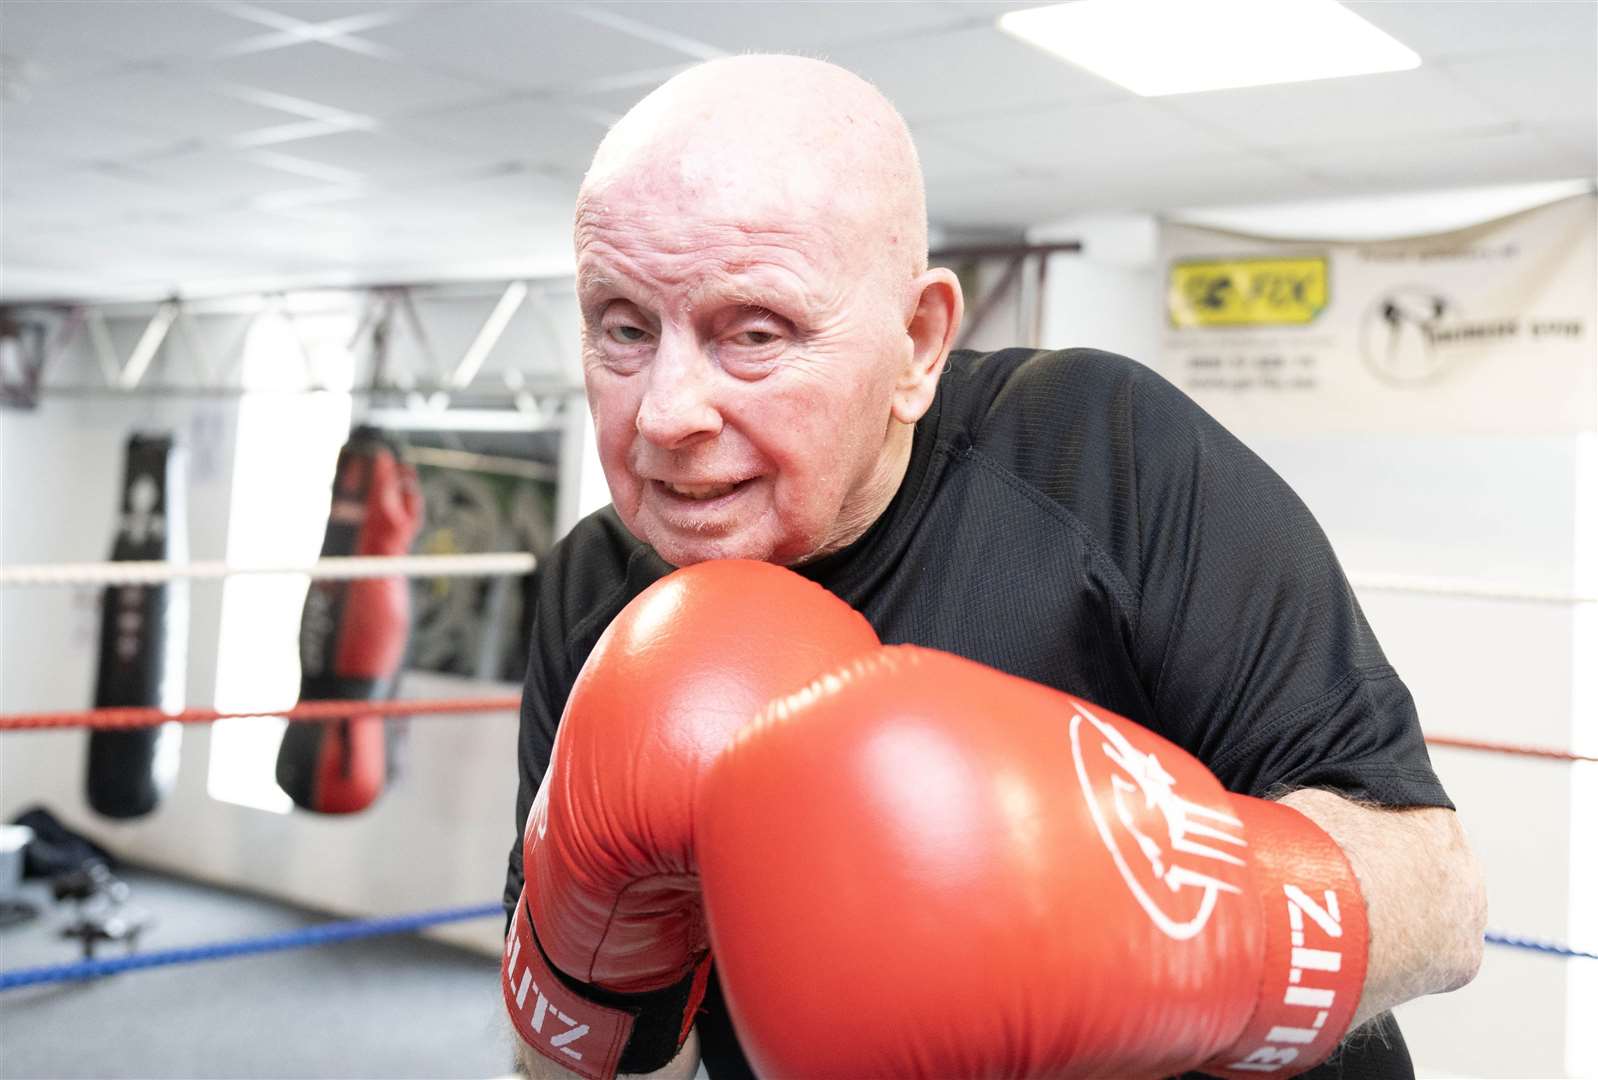 Eighty-year-old Baz Gerlack back in the boxing ring